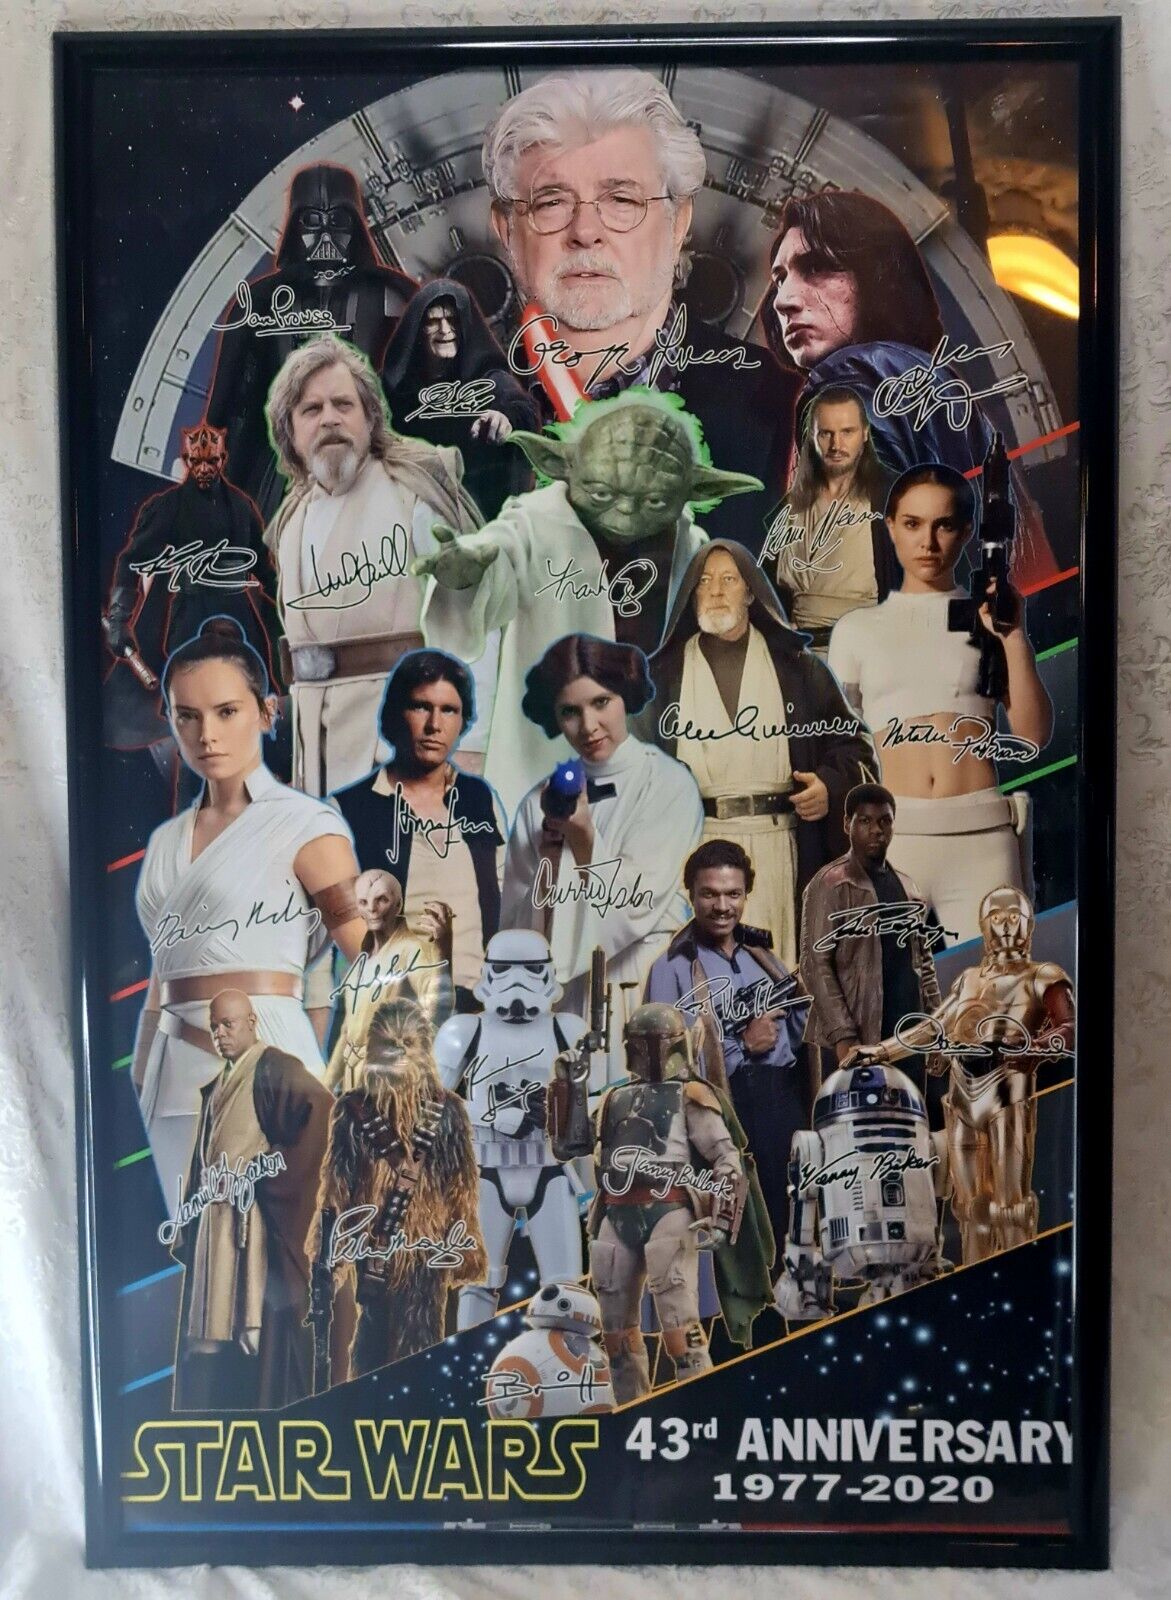 Star Wars Signature Poster Rare 43rd Anniversary 25x27 Poster Frame Never Hung